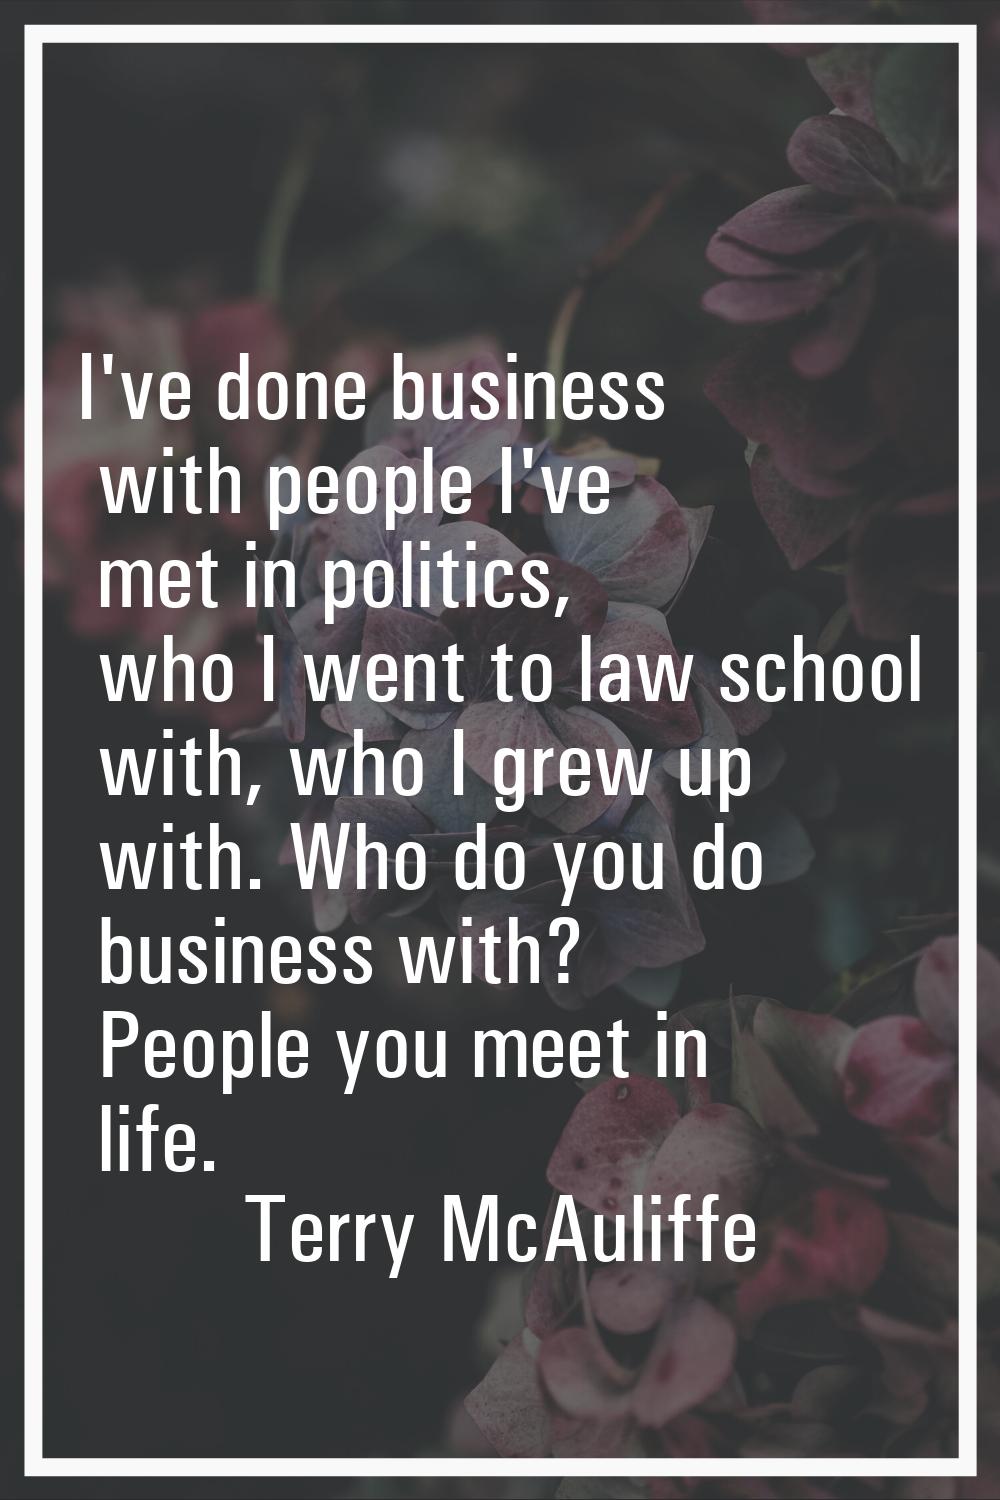 I've done business with people I've met in politics, who I went to law school with, who I grew up w